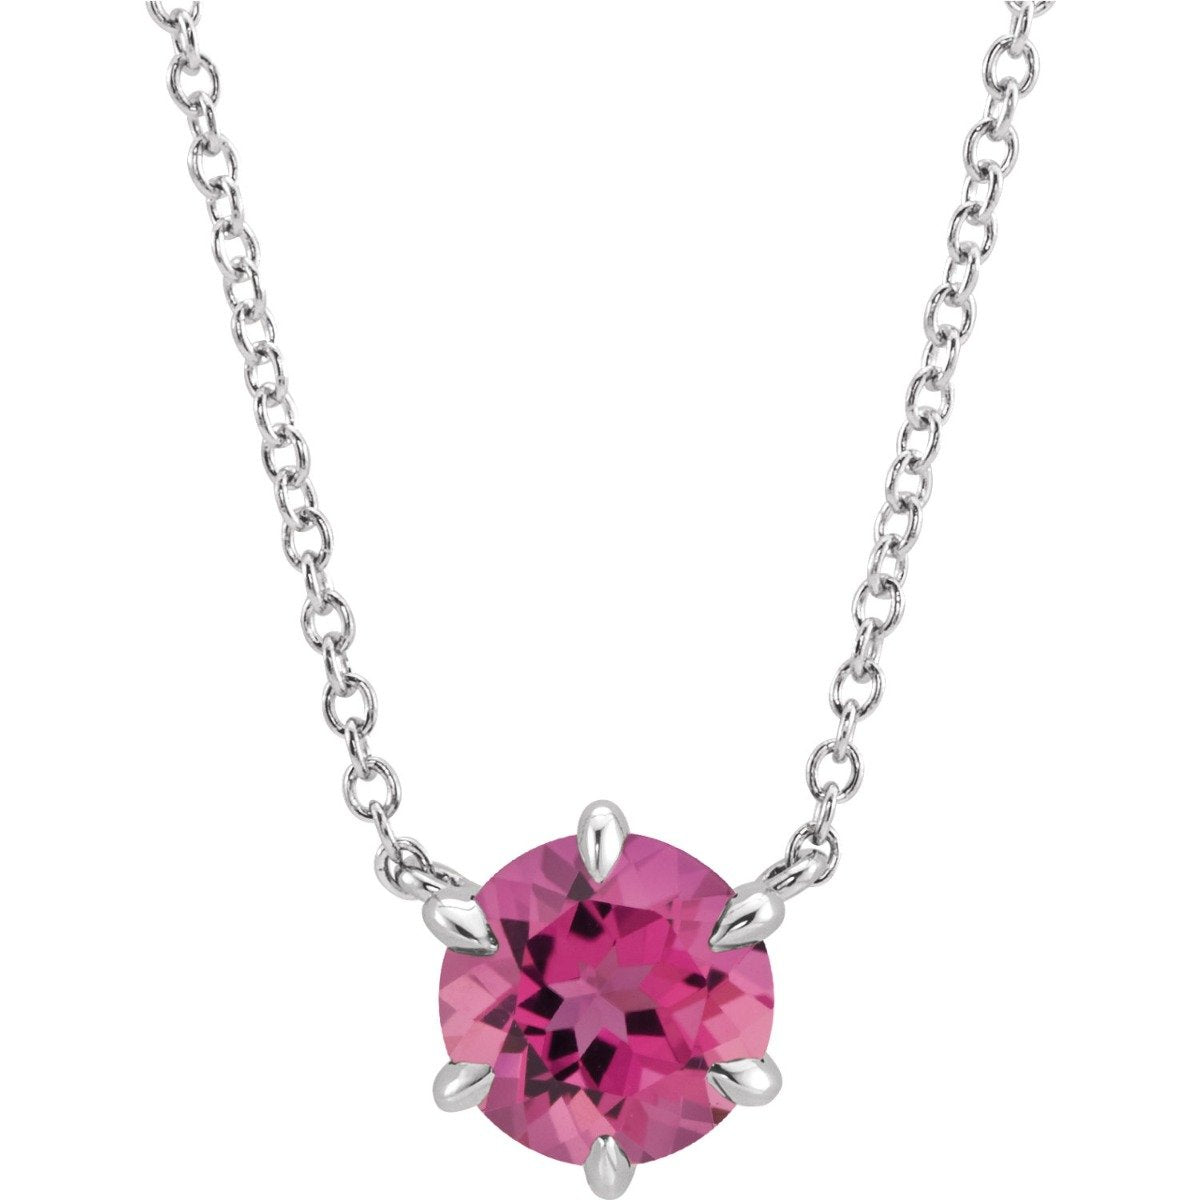 14KT GOLD 0.55 CT PINK TOURMALINE SOLITAIRE NECKLACE White